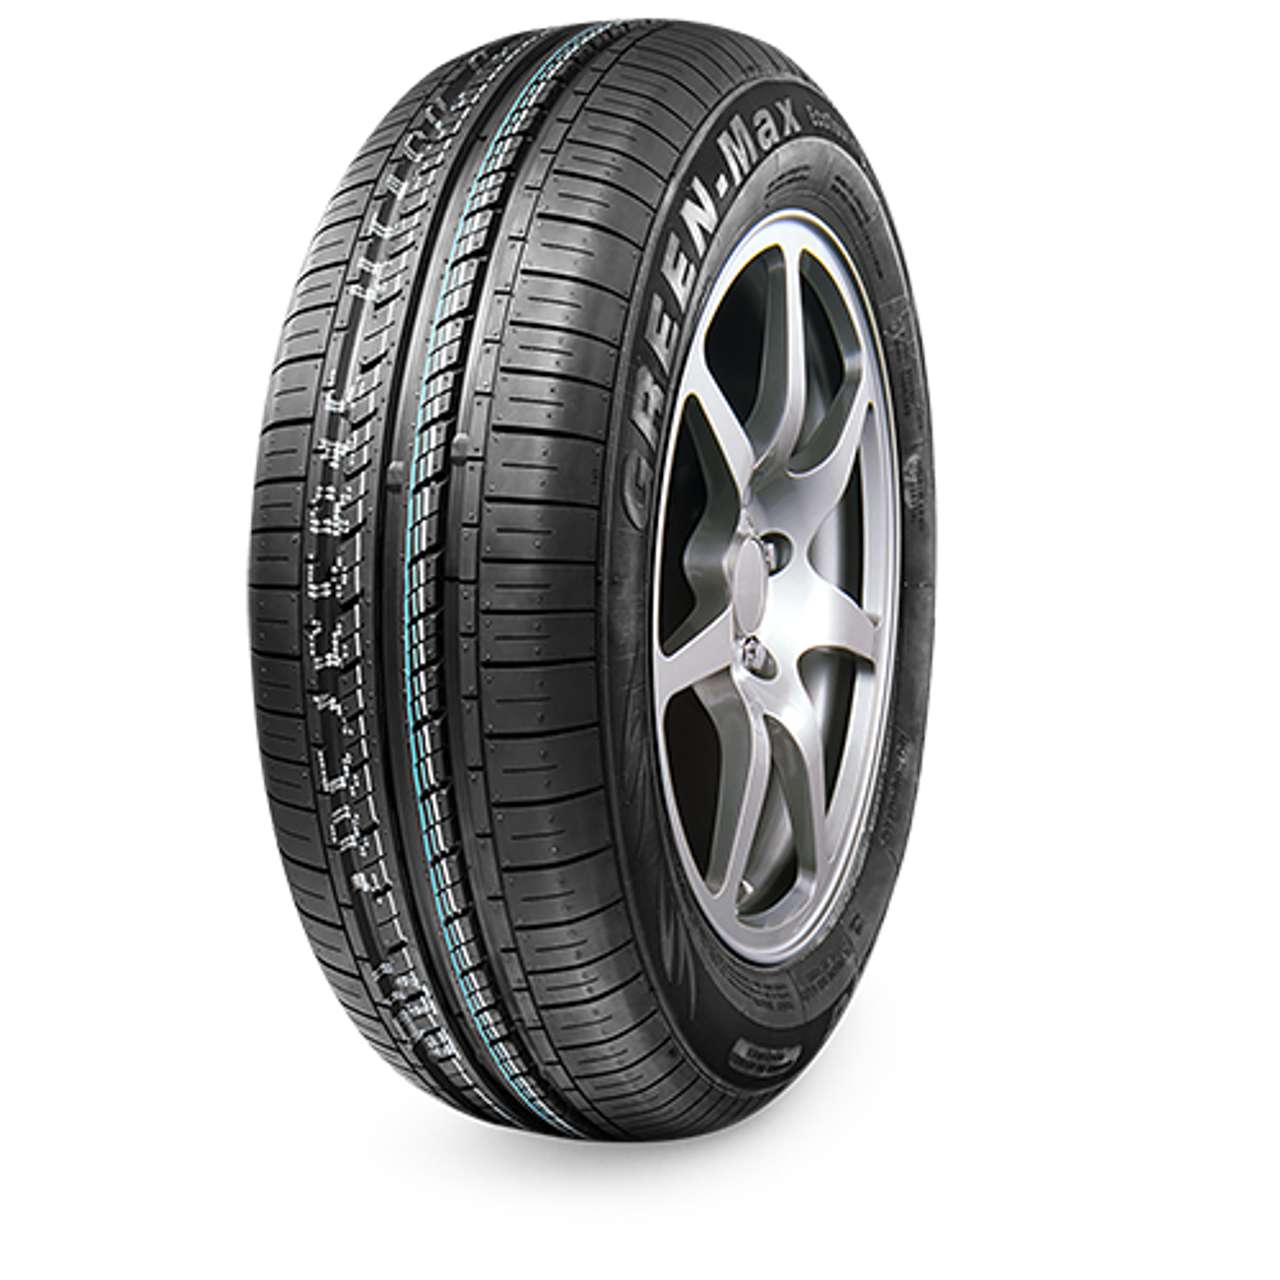 LINGLONG GREEN-MAX ECOTOURING 175/70R14 88T BSW XL